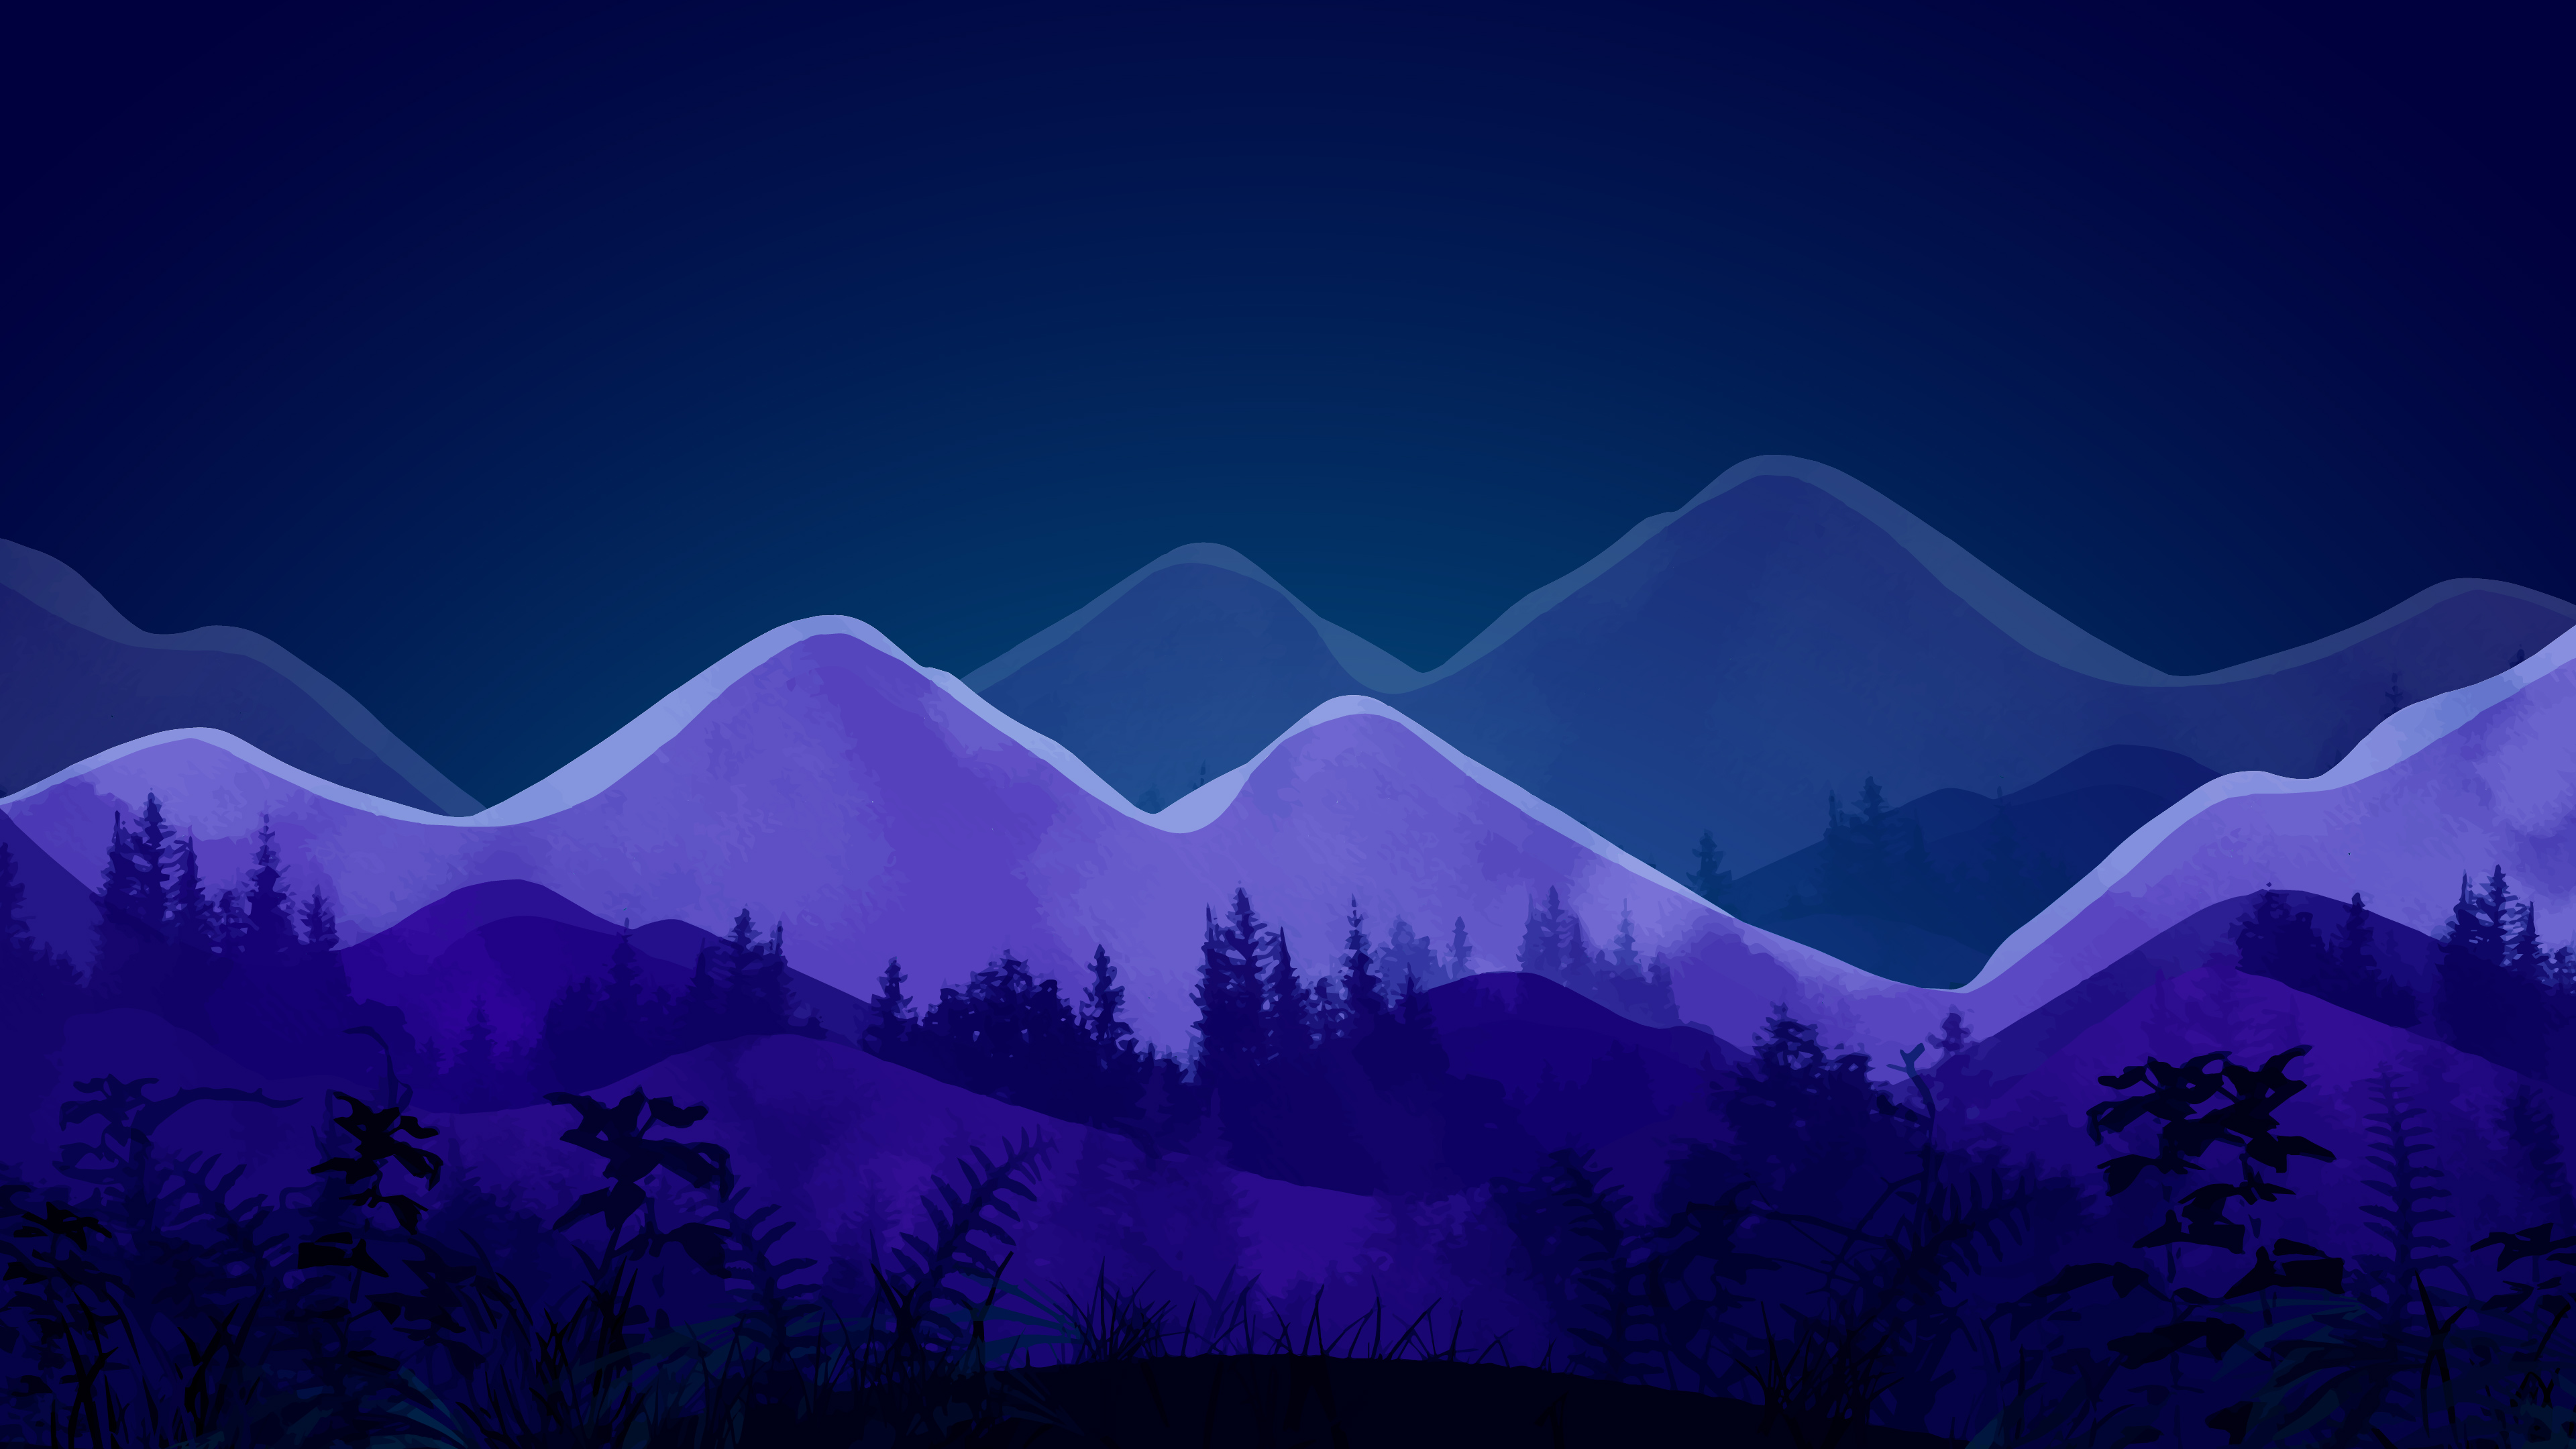 Artistic Mountain Wallpapers